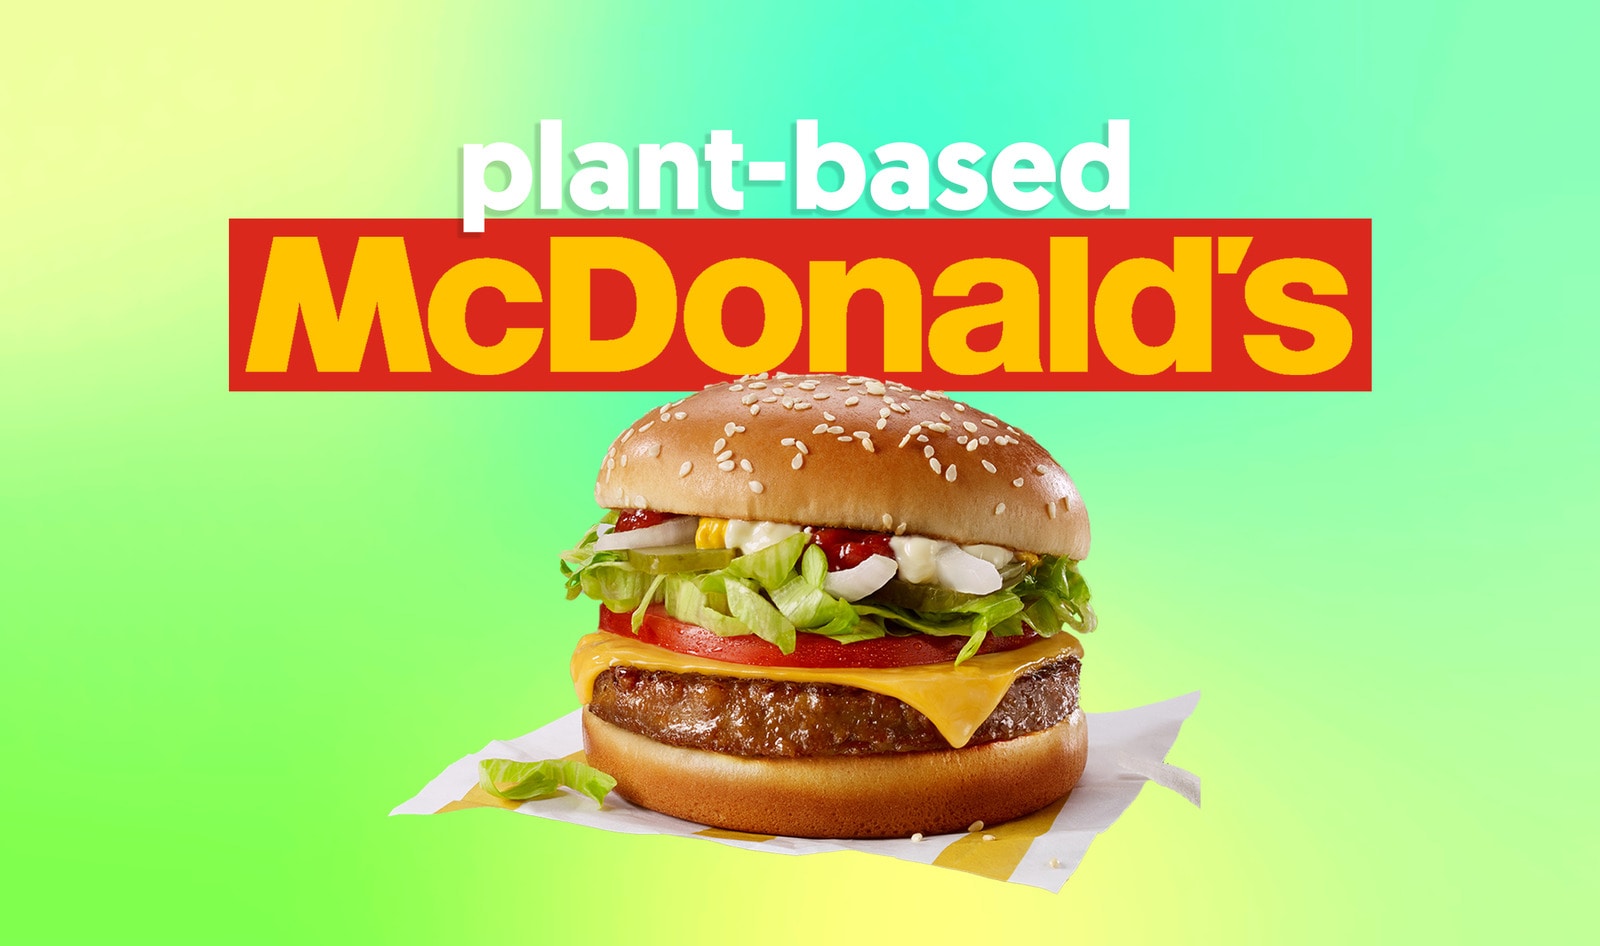 McDonald’s to Launch Plant-Based Burger in 2021 Through New “McPlant” Platform